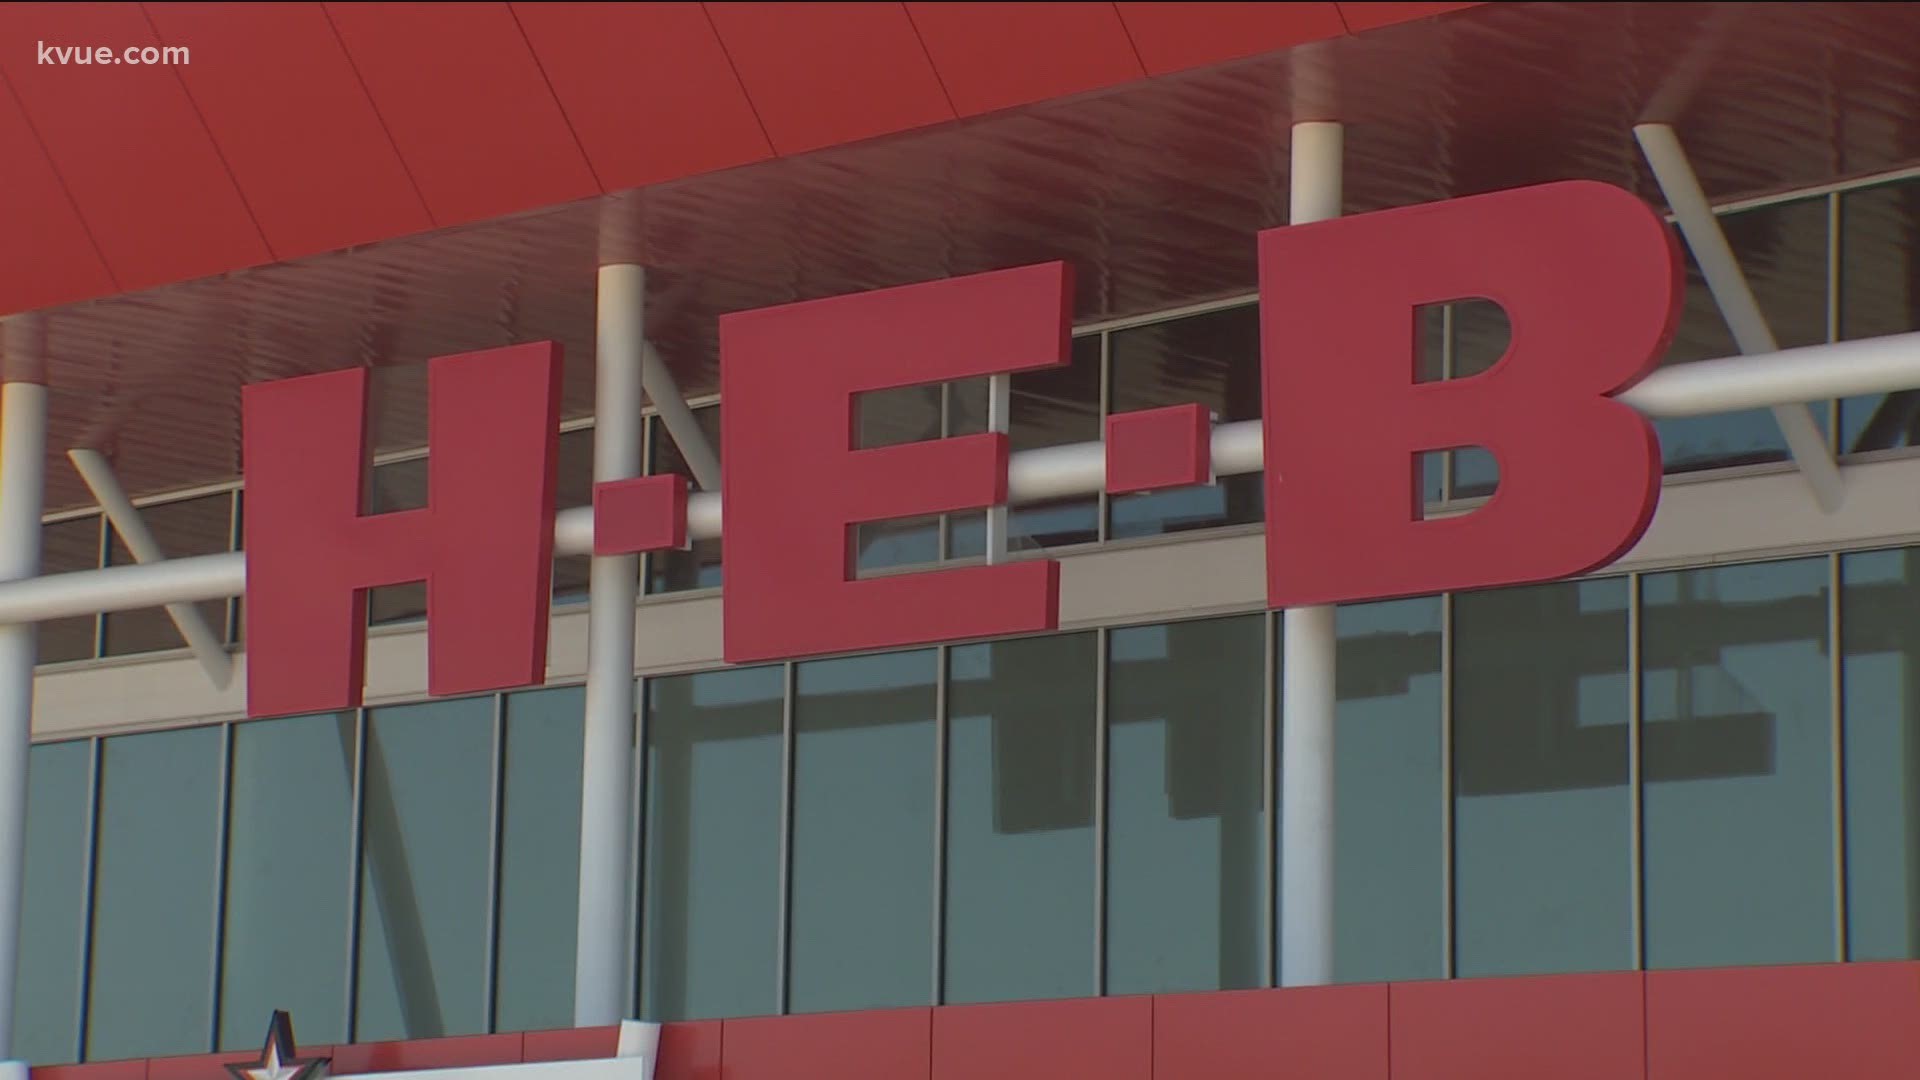 This highly-anticipated South Austin location is part of more than $200 million in H-E-B projects.